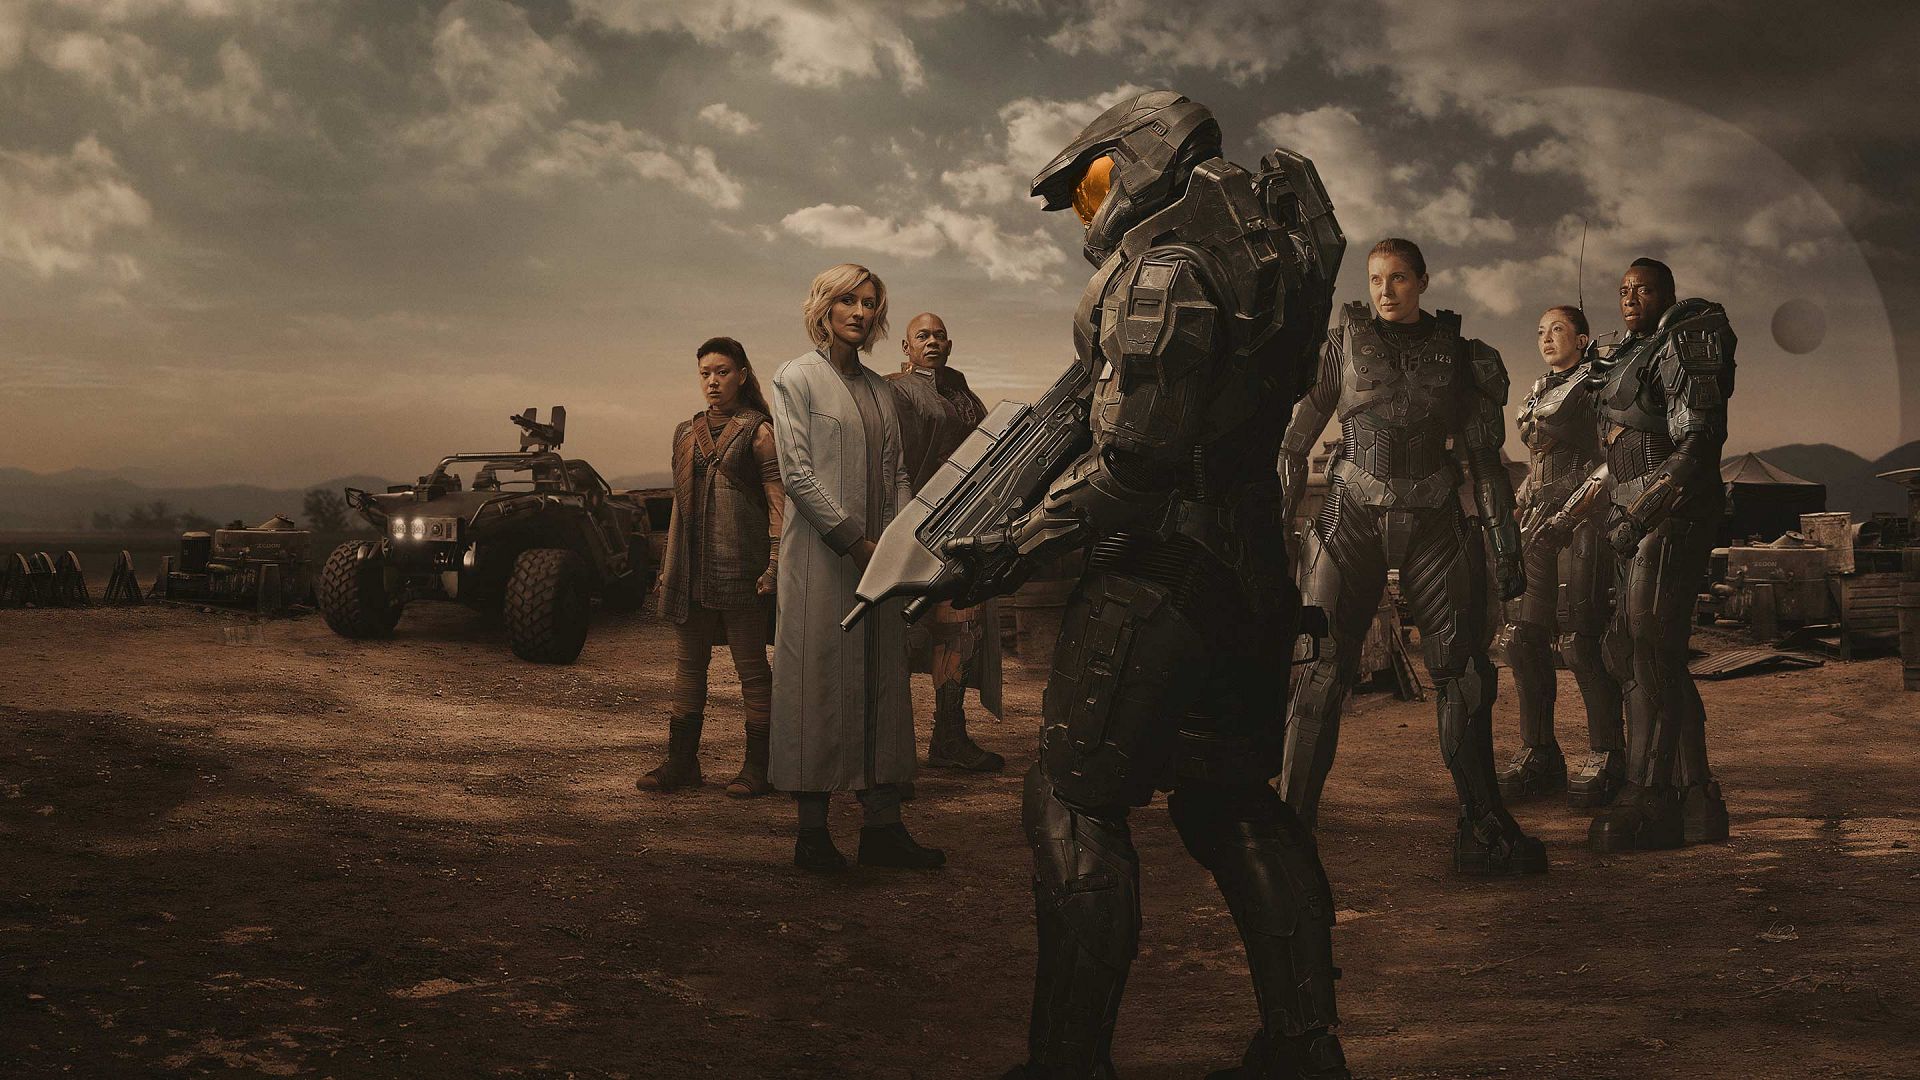 Halo Cast - Every Performer and Character in the Paramount+ Series